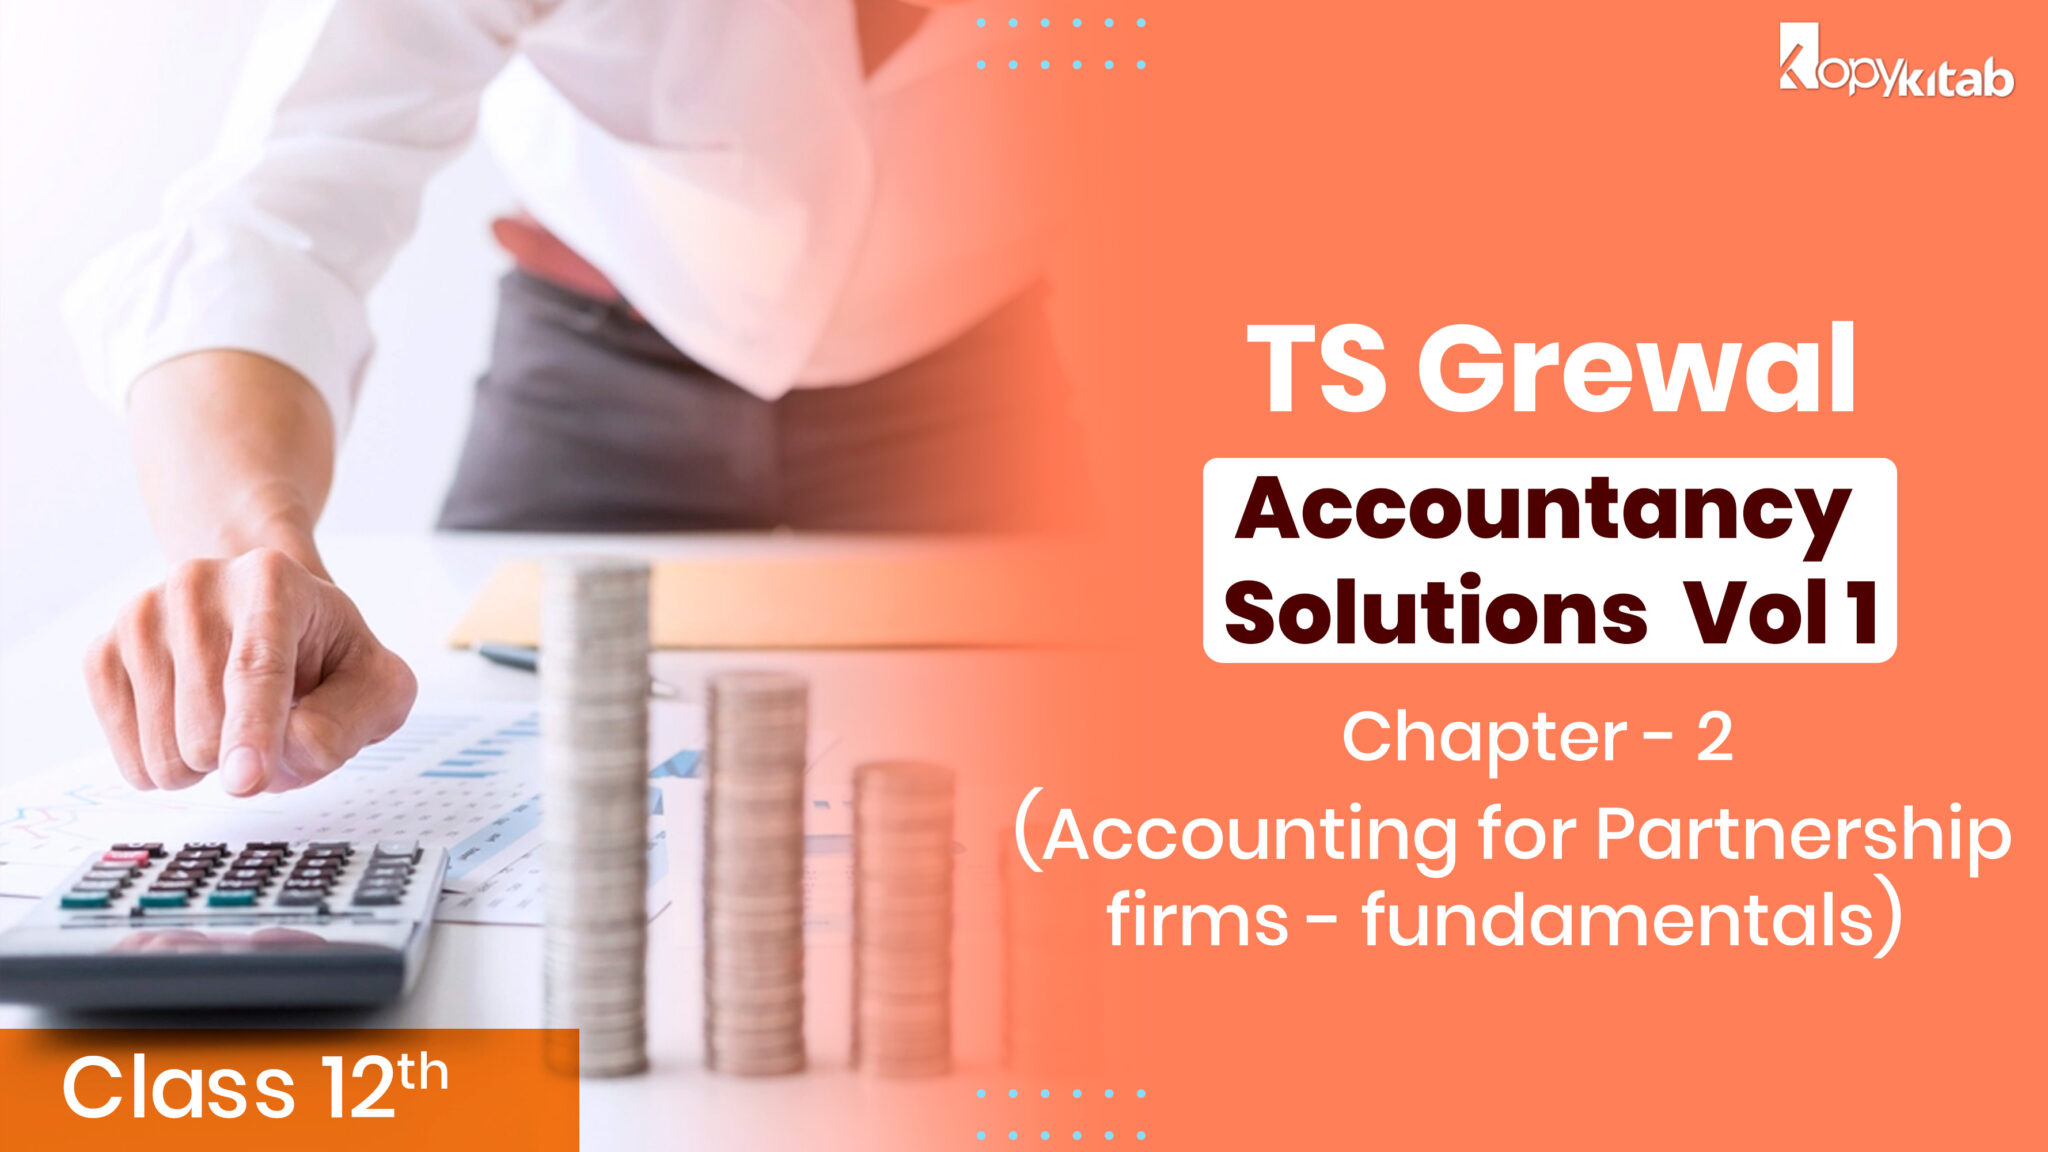 TS Grewal Class 12 Accountancy Solutions Vol 1 Chapter 2- Accounting for Partnership Firms- Fundamentals